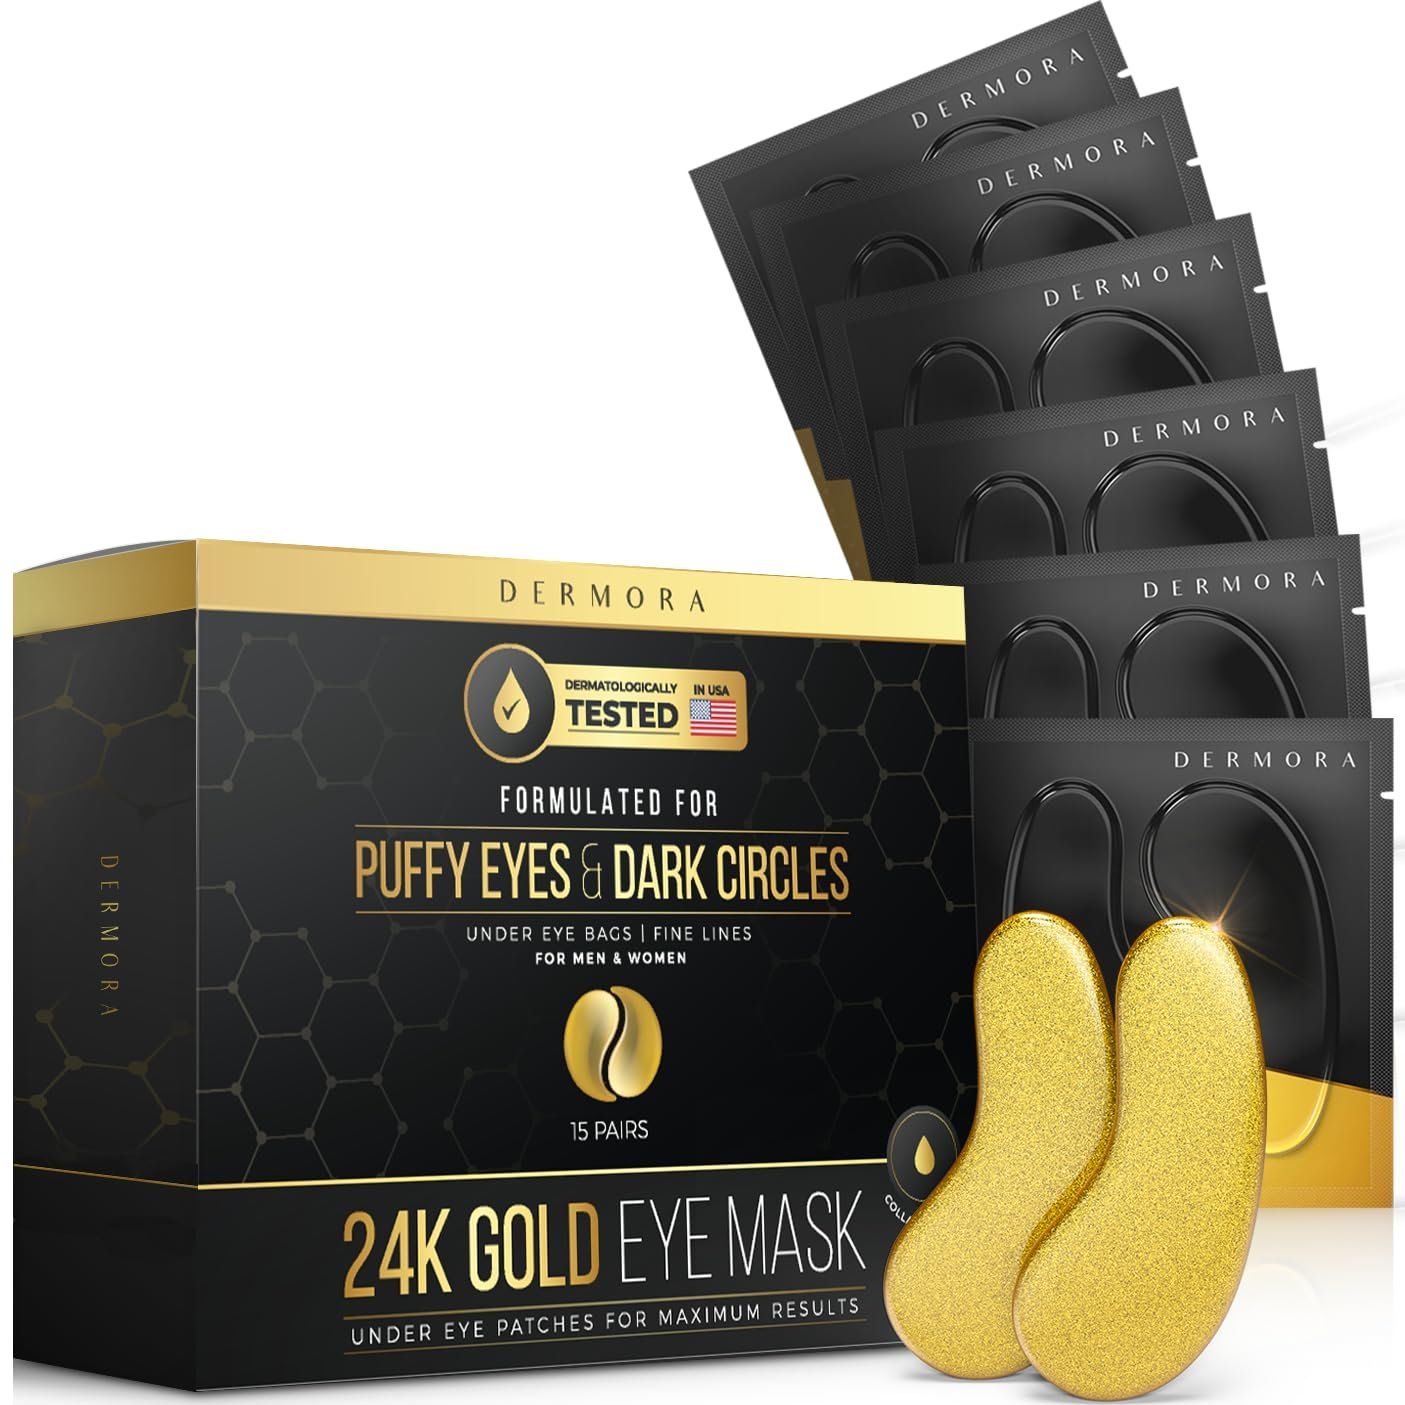 DERMORA Golden Glow Under Eye Patches (15 Pairs Eye Gels) - Rejuvenating Treatment for Dark Circles, Puffiness, Refreshing ,Revitalizing, Travel, Wrinkles